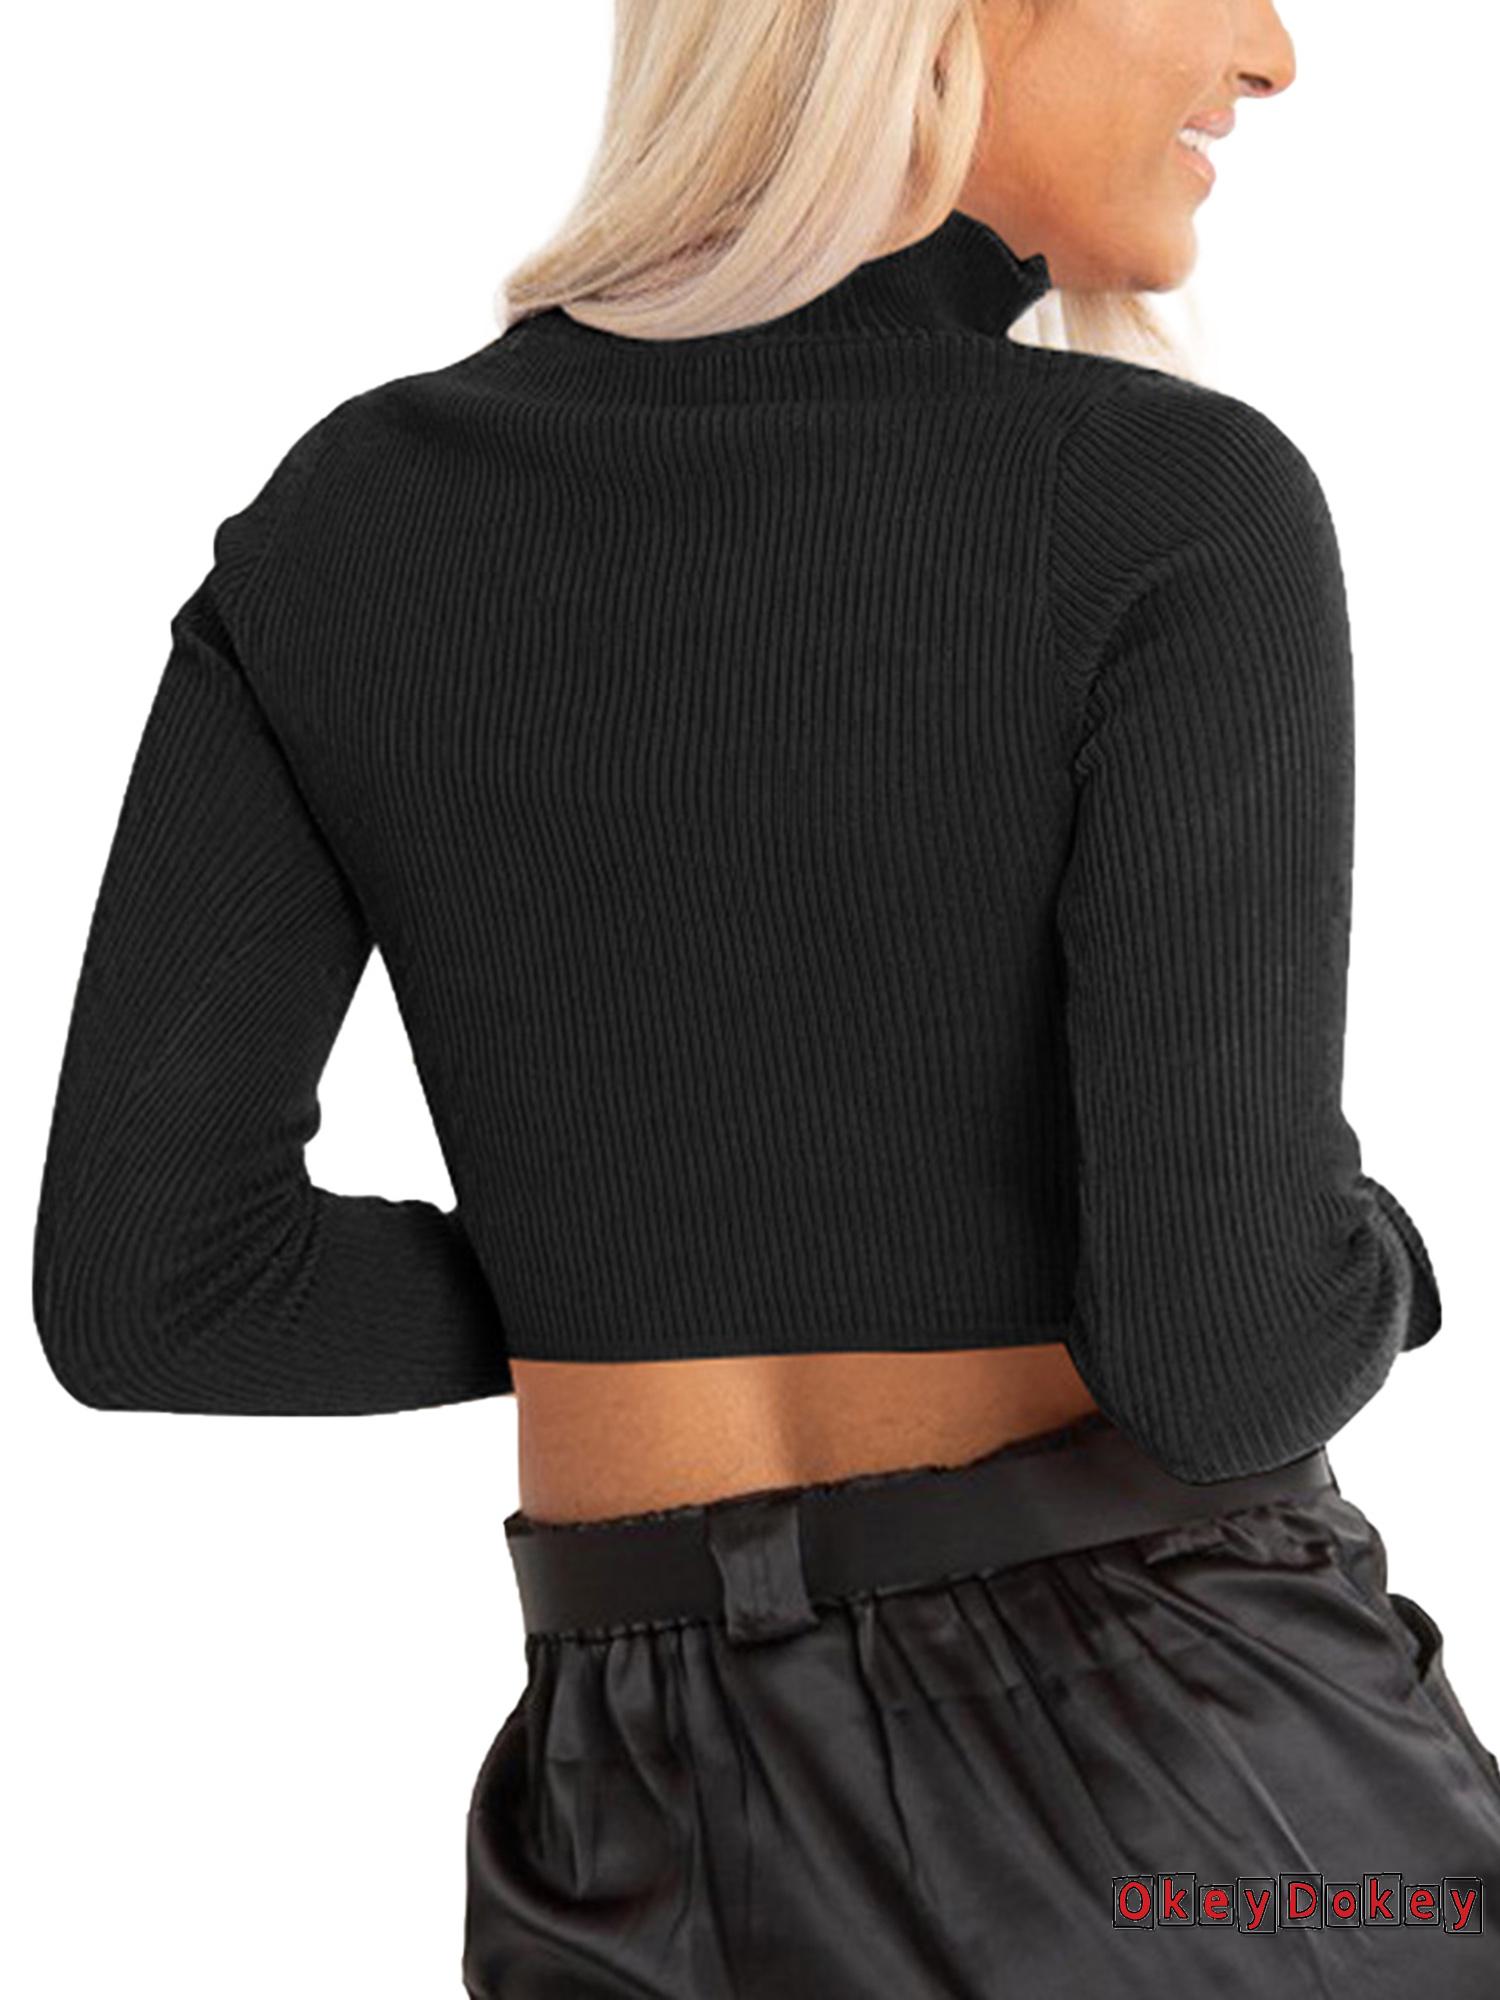 OKDK-Women´s Rib Knit Crop Top Long Sleeve Stand Collar Zipper Front Slim Fit Solid Color Basic Tee Shirt